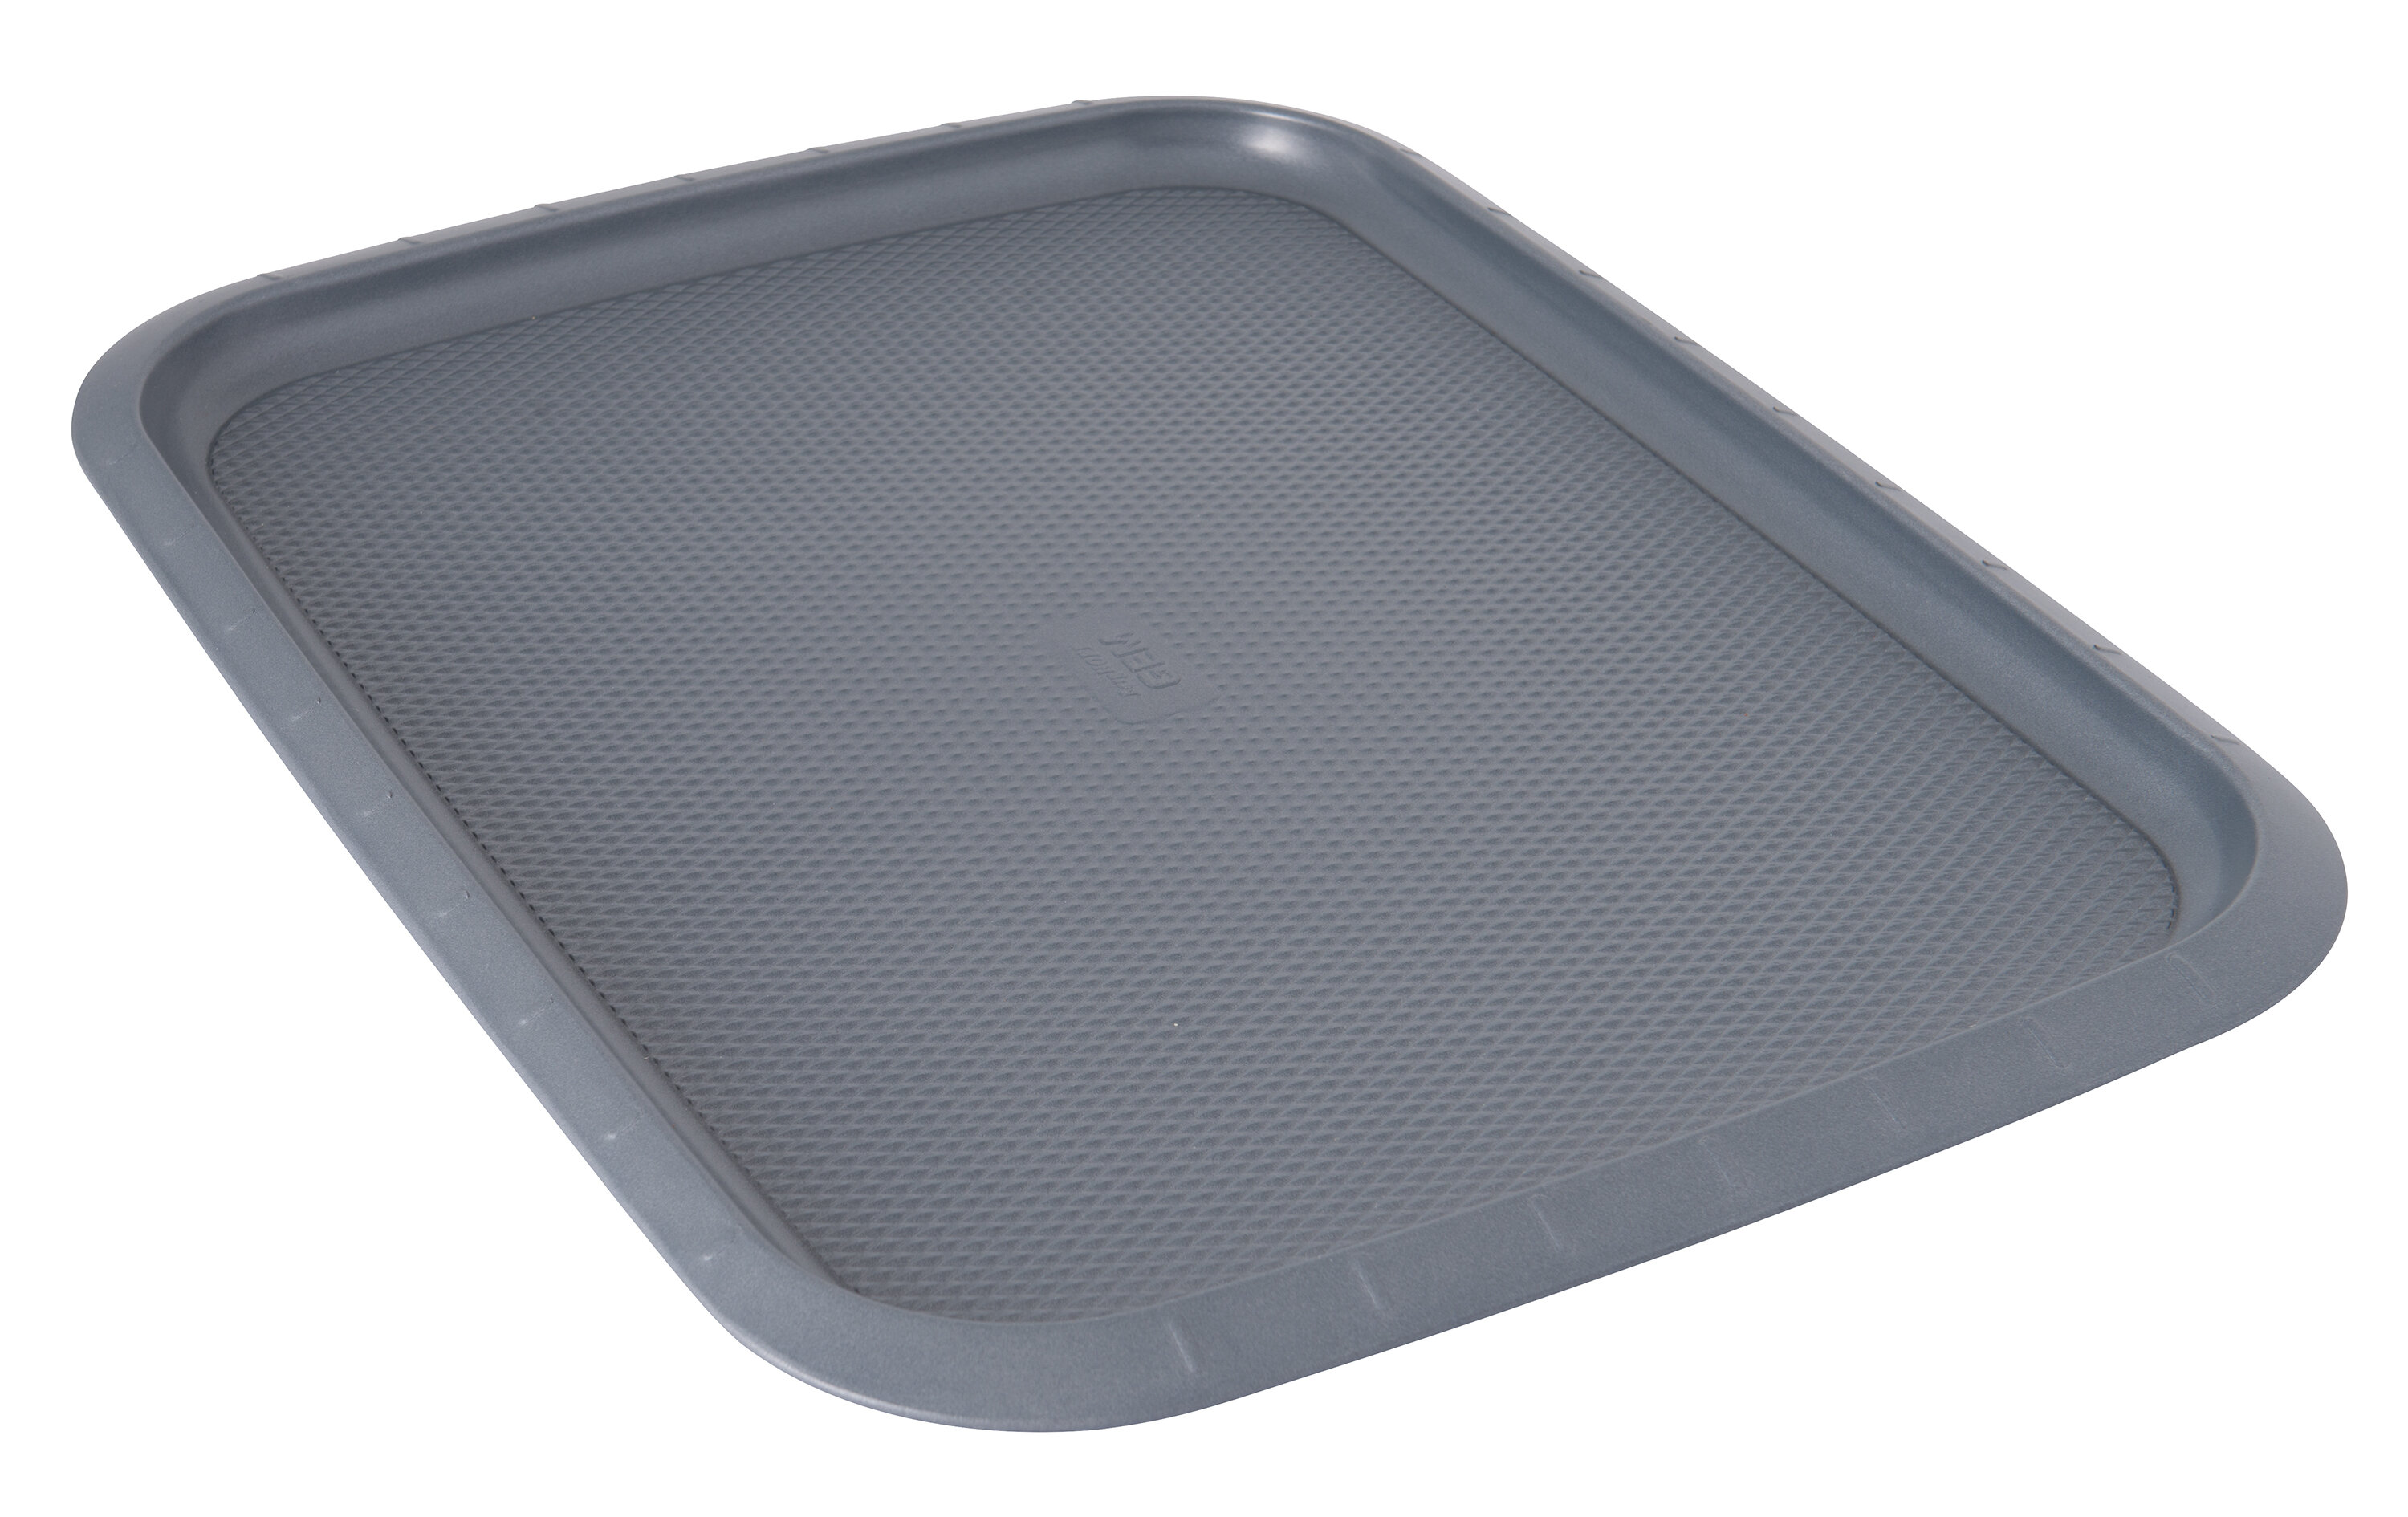 Small cookie sheet  Official BergHOFF Outlet